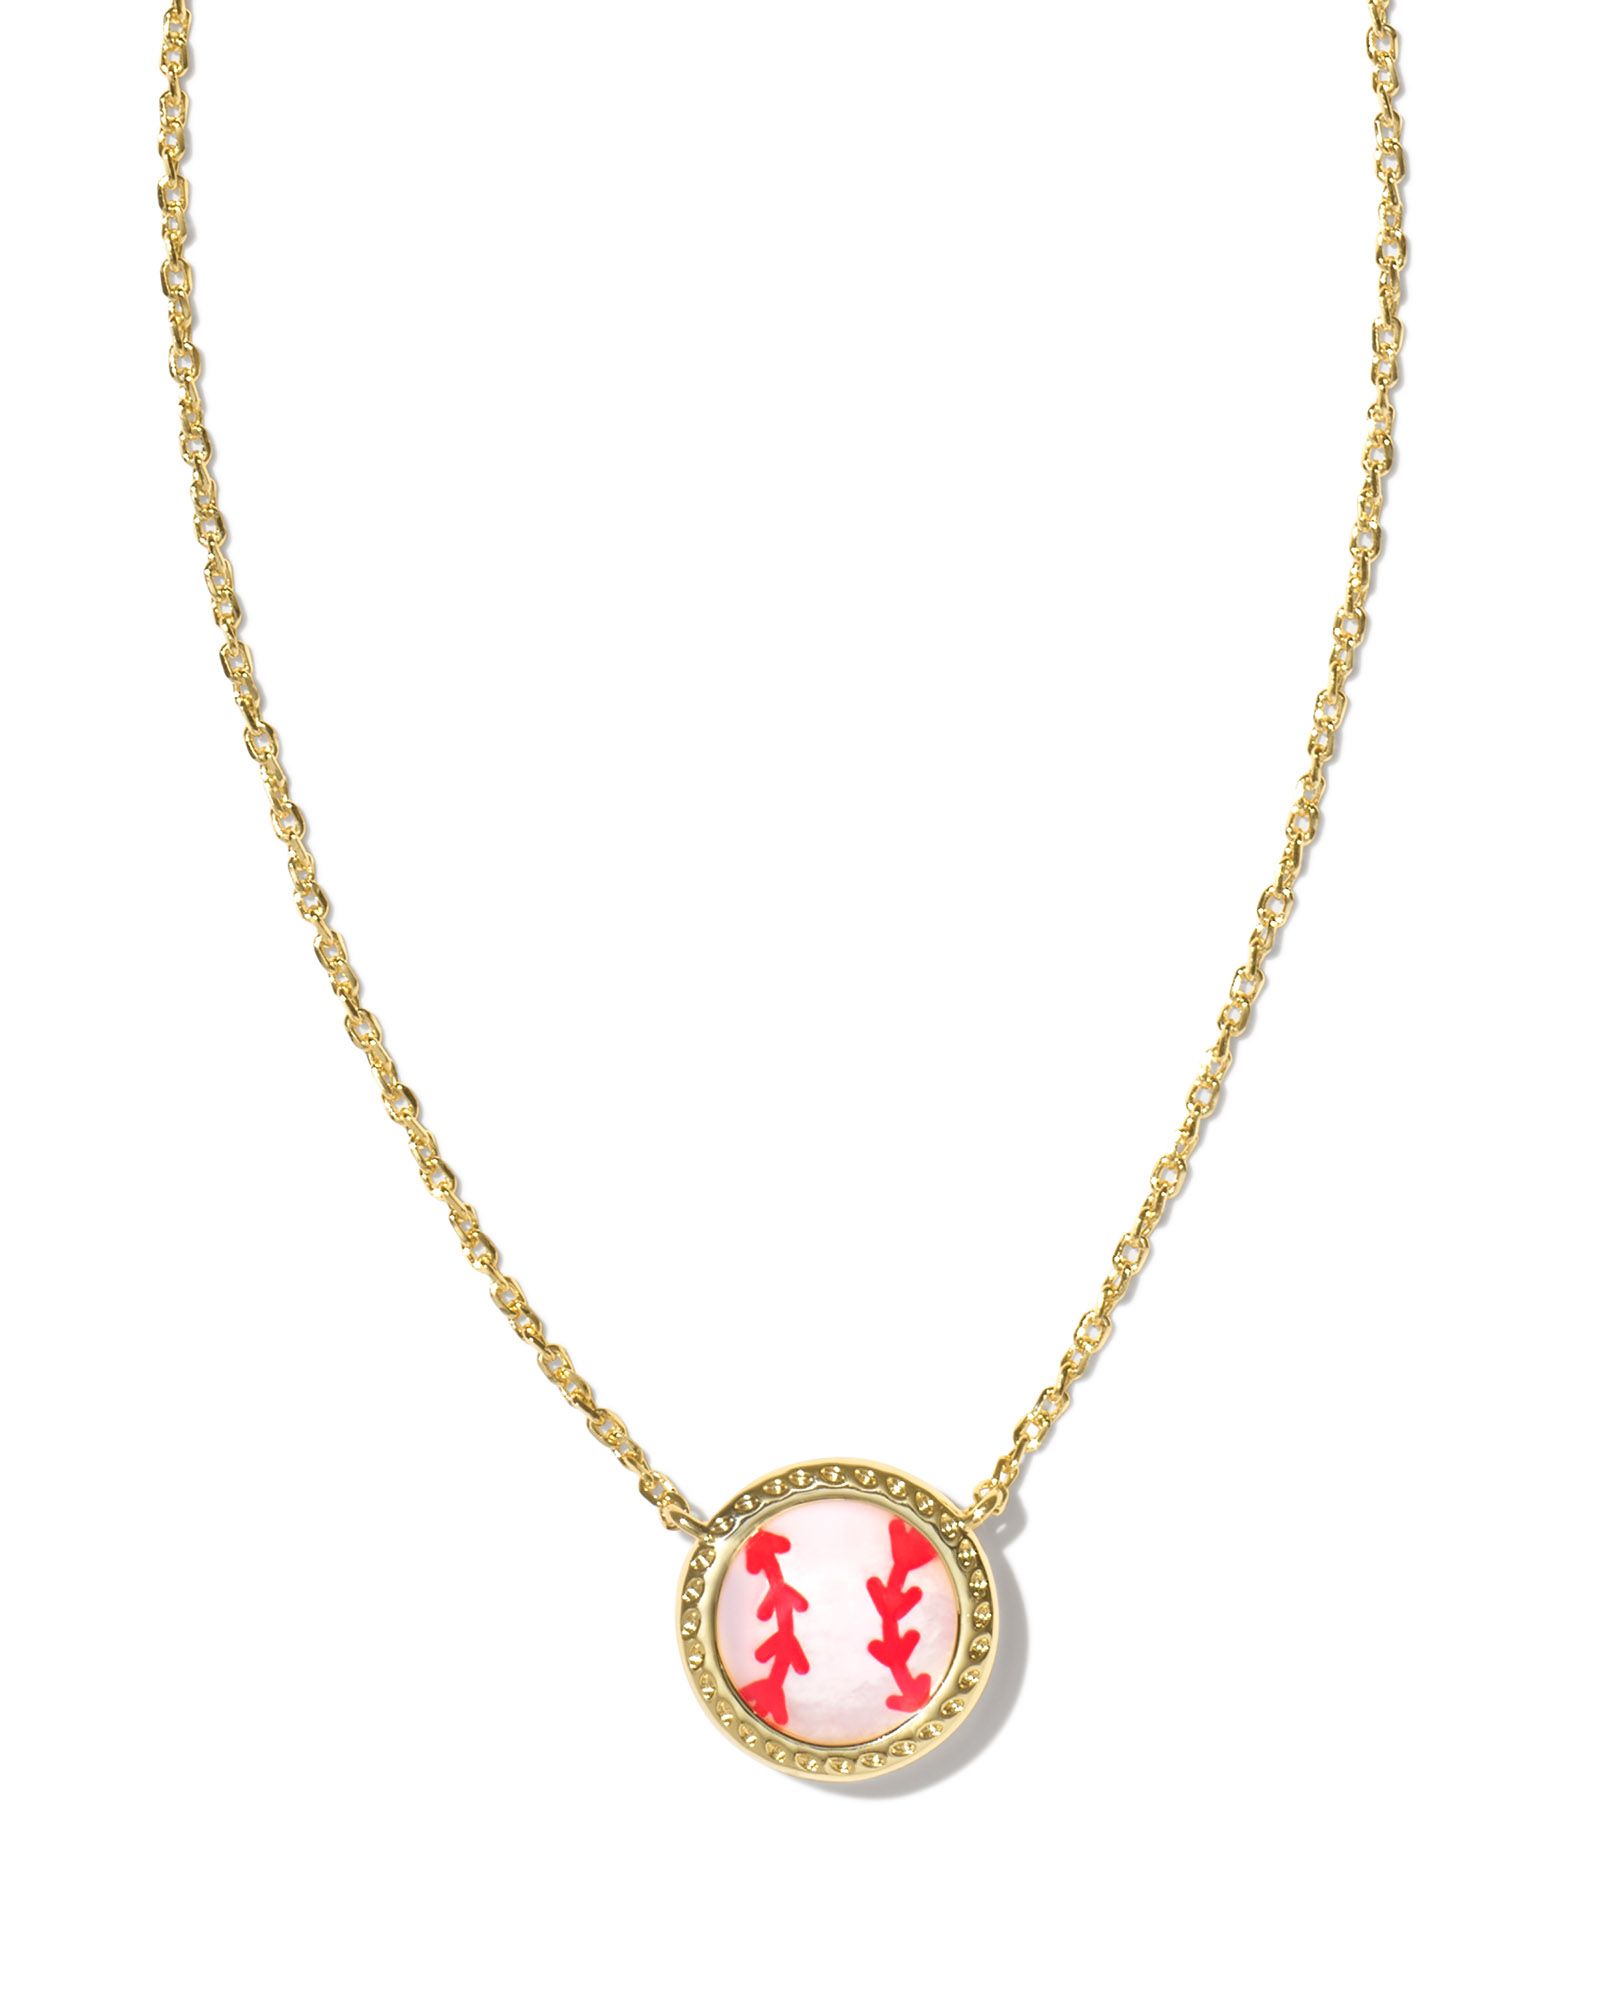 Baseball Gold Short Pendant Necklace in Ivory Mother-of-Pearl | Kendra Scott